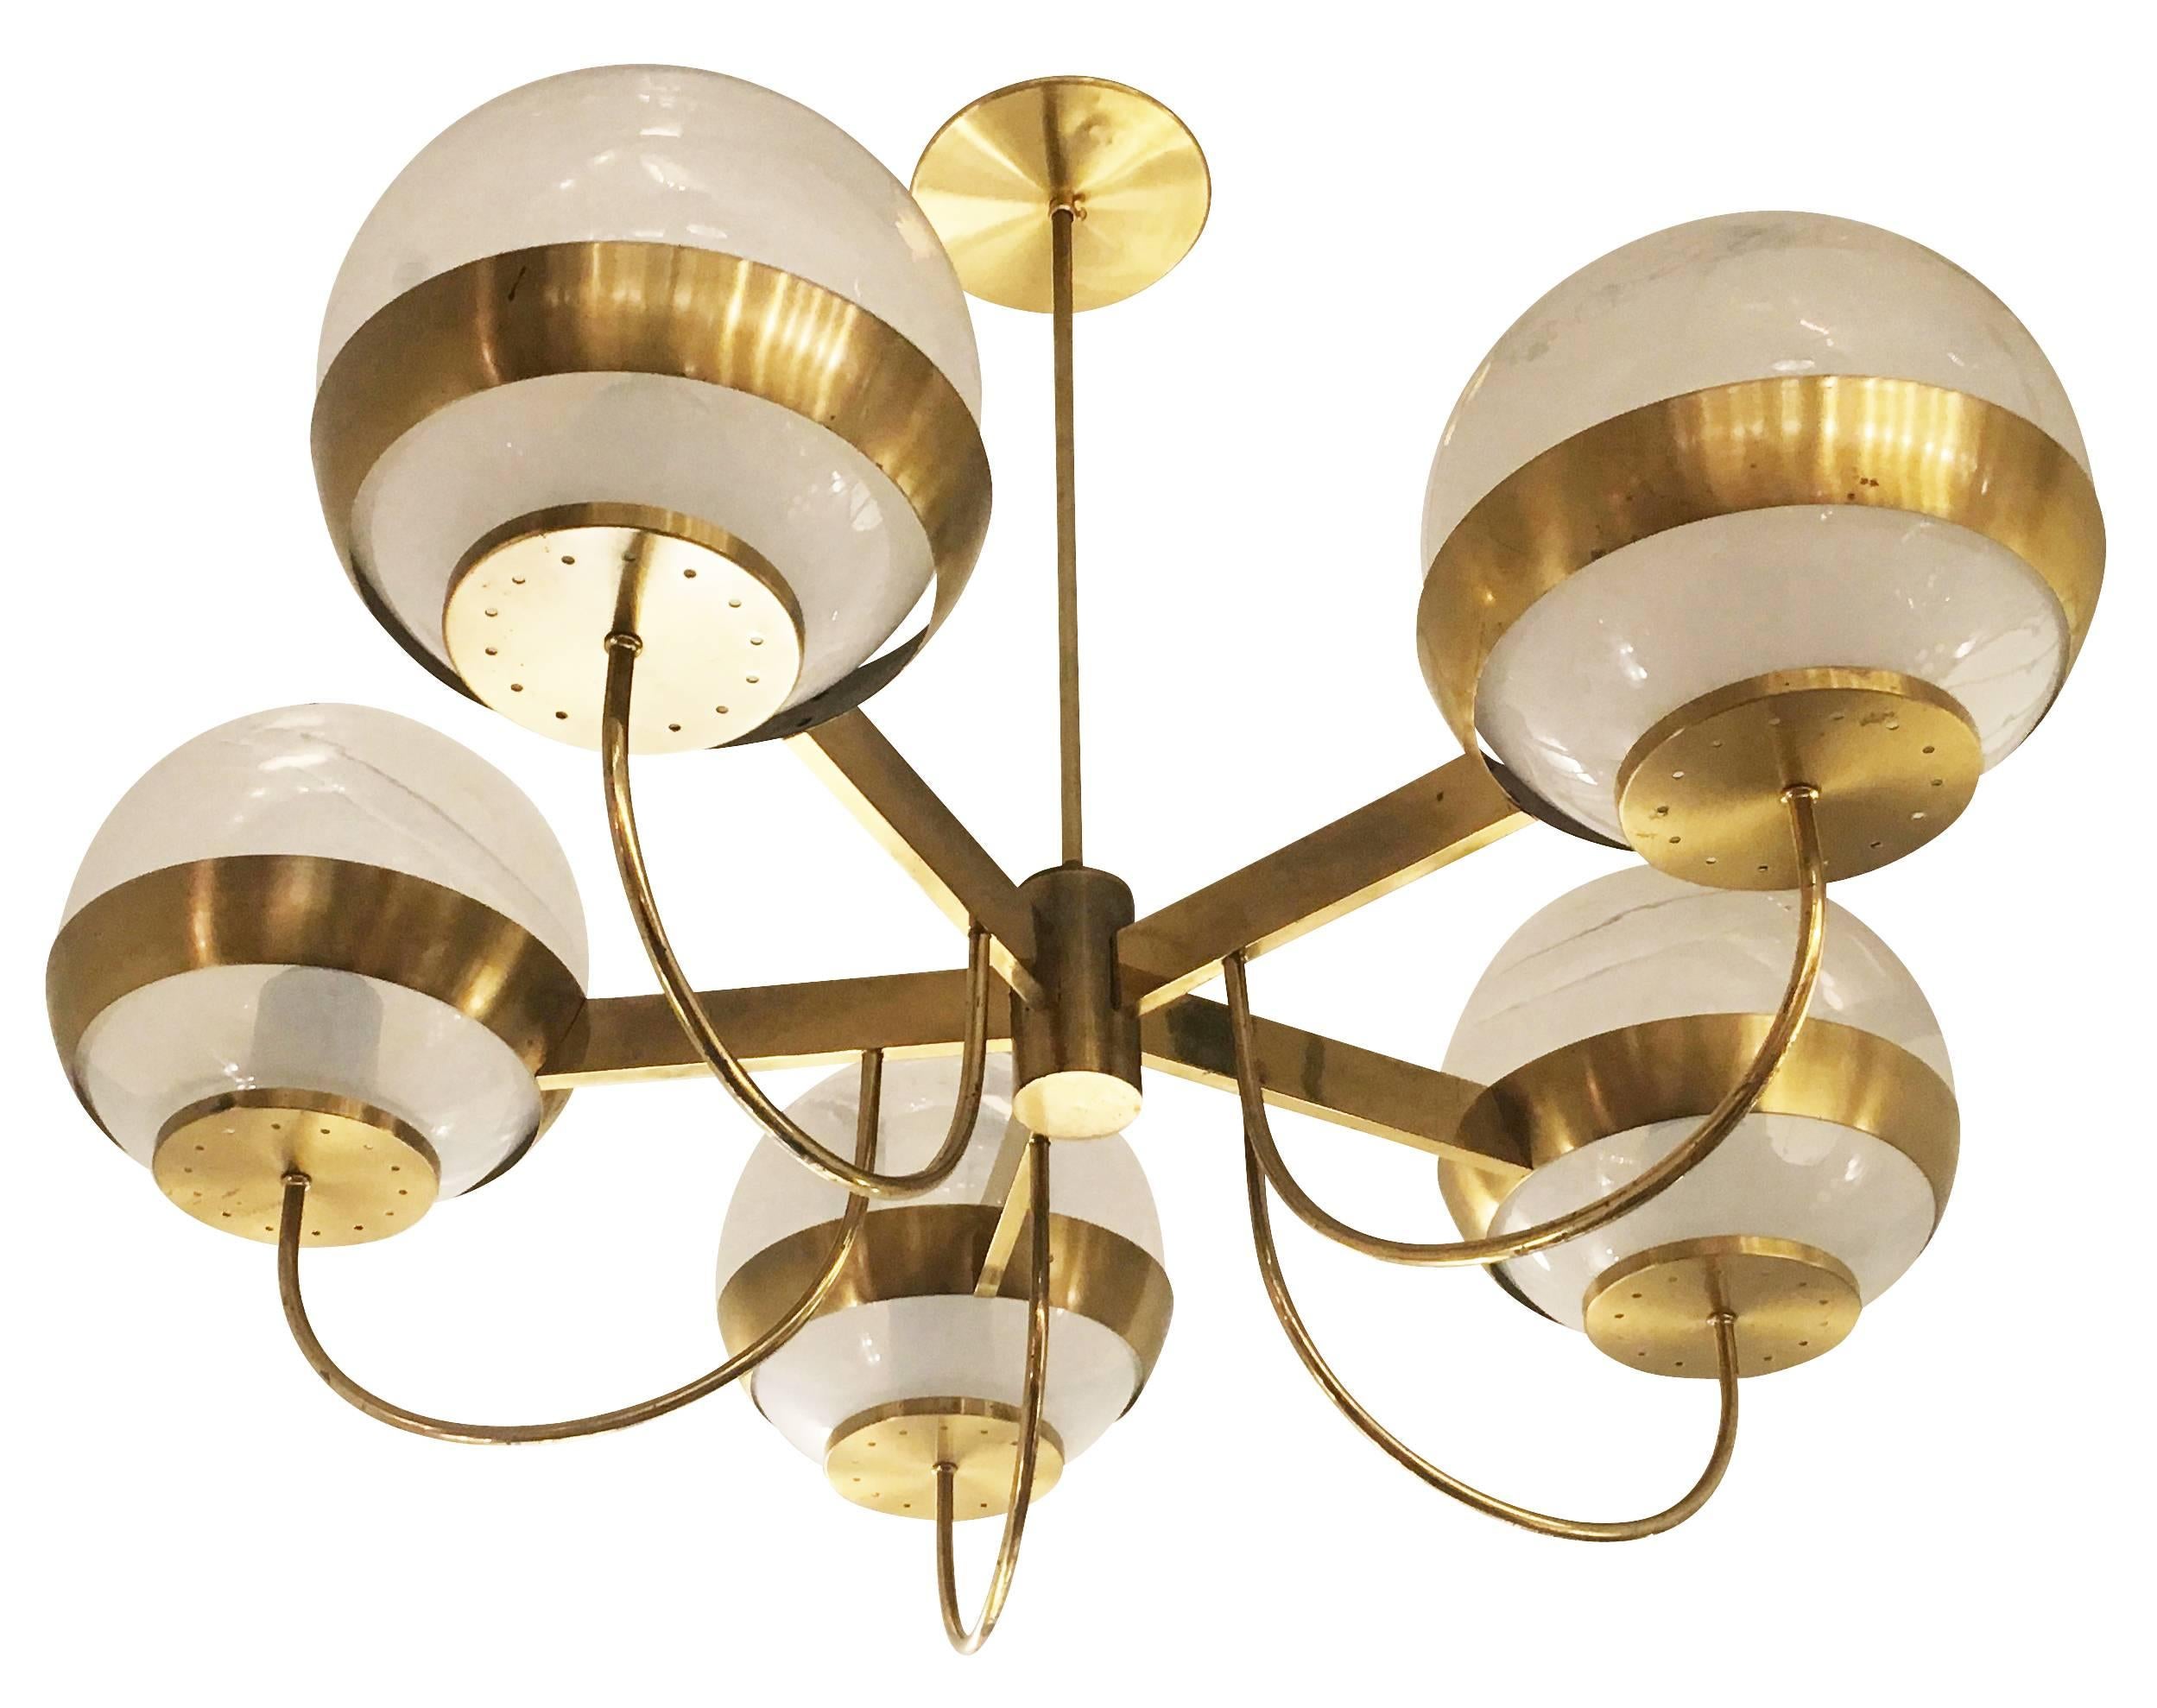 Brass chandelier made by Lamperti in the 1970s. The five glass shades gradually fade from white at the bottom to clear at the top. Holds five regular sockets. Stem can be adjusted as needed.

Condition: Excellent vintage condition, minor wear